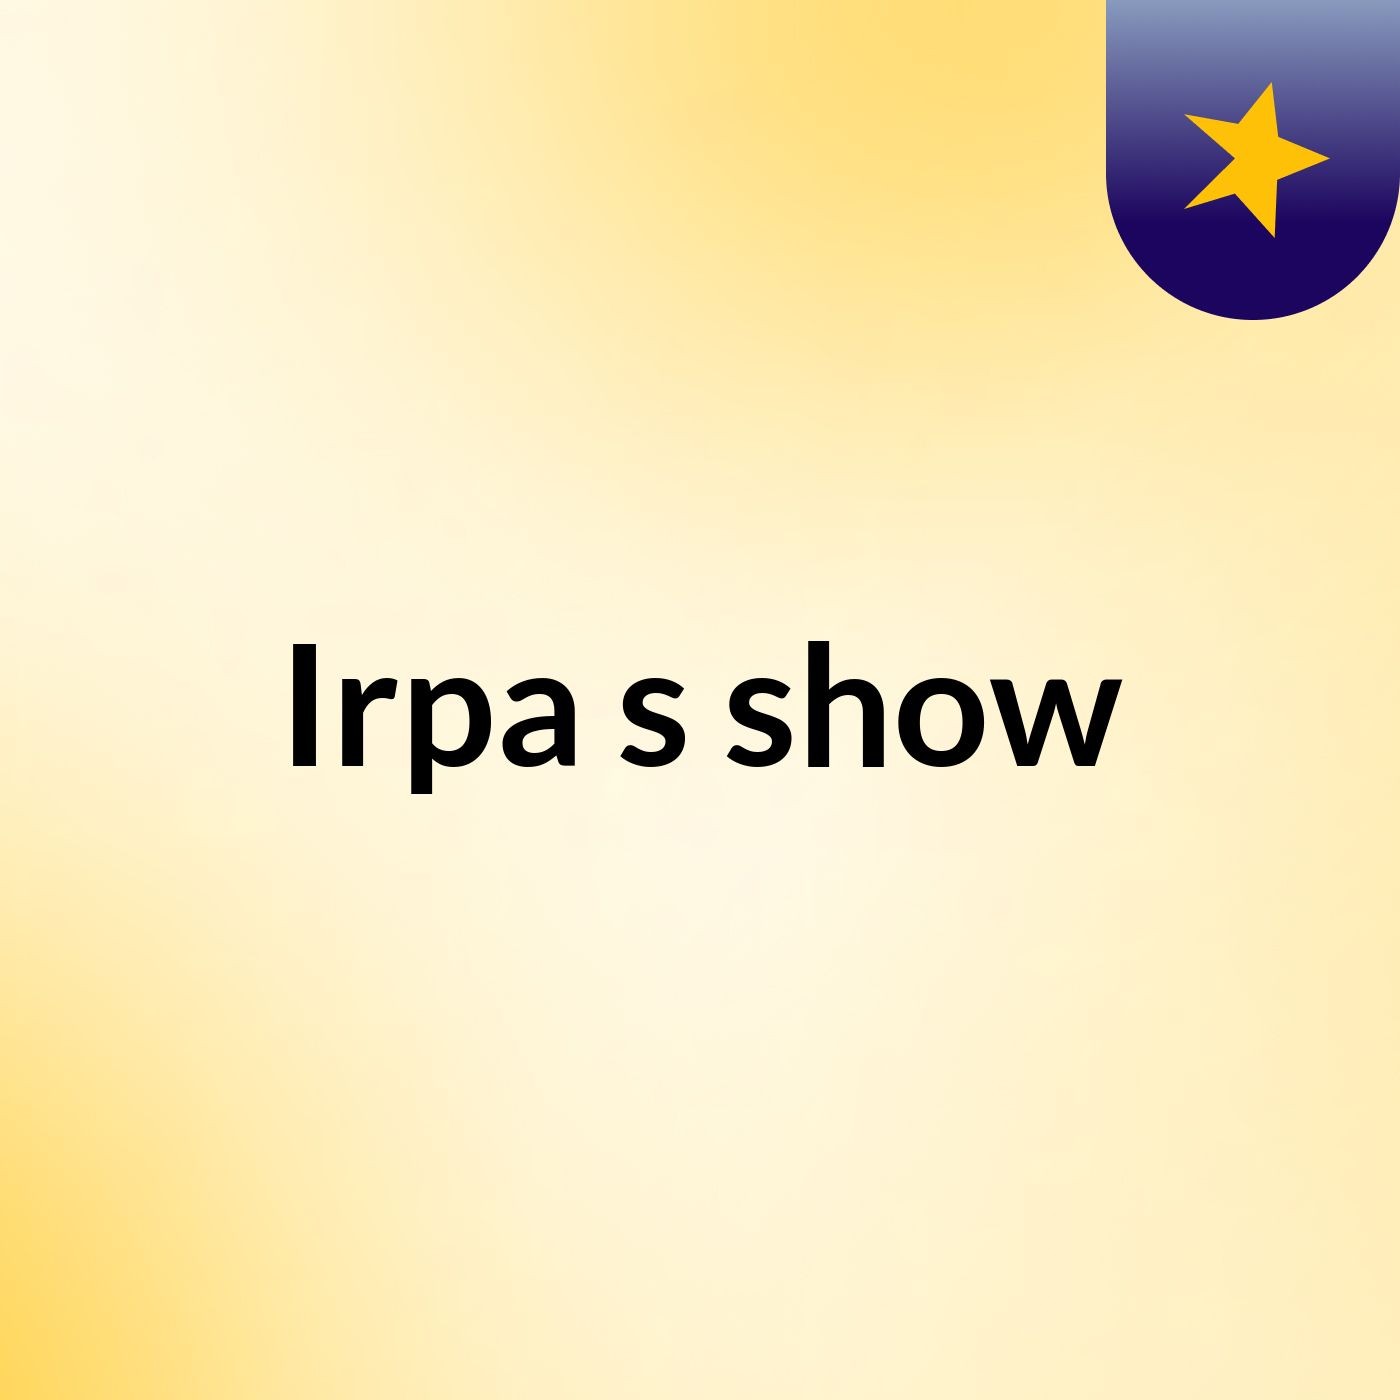 Irpa's show